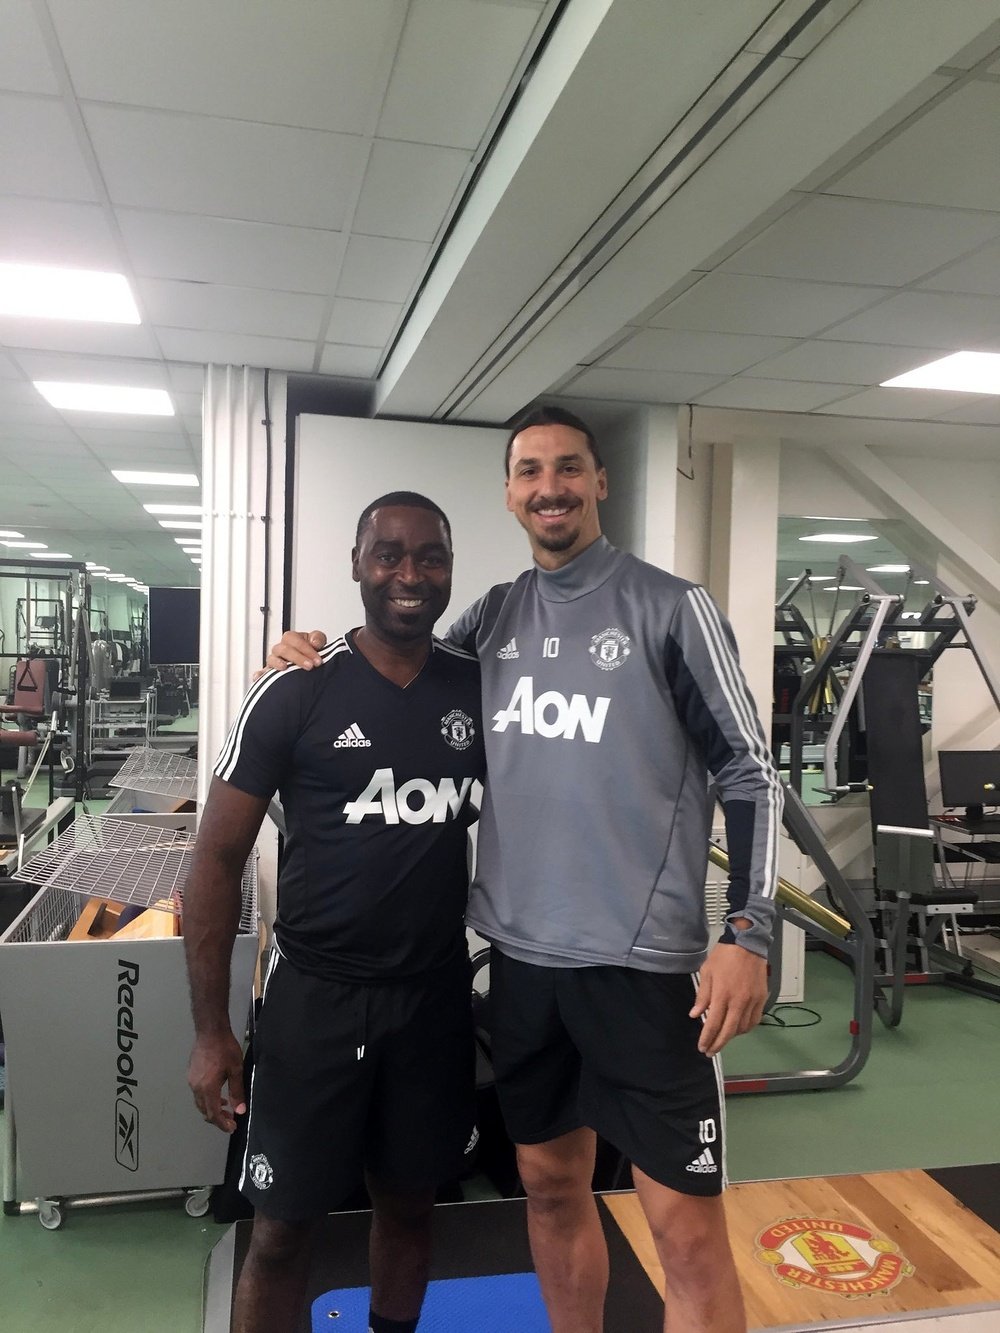 Andy Cole and Ibrahimovic in the gym. Twitter/VanCole9